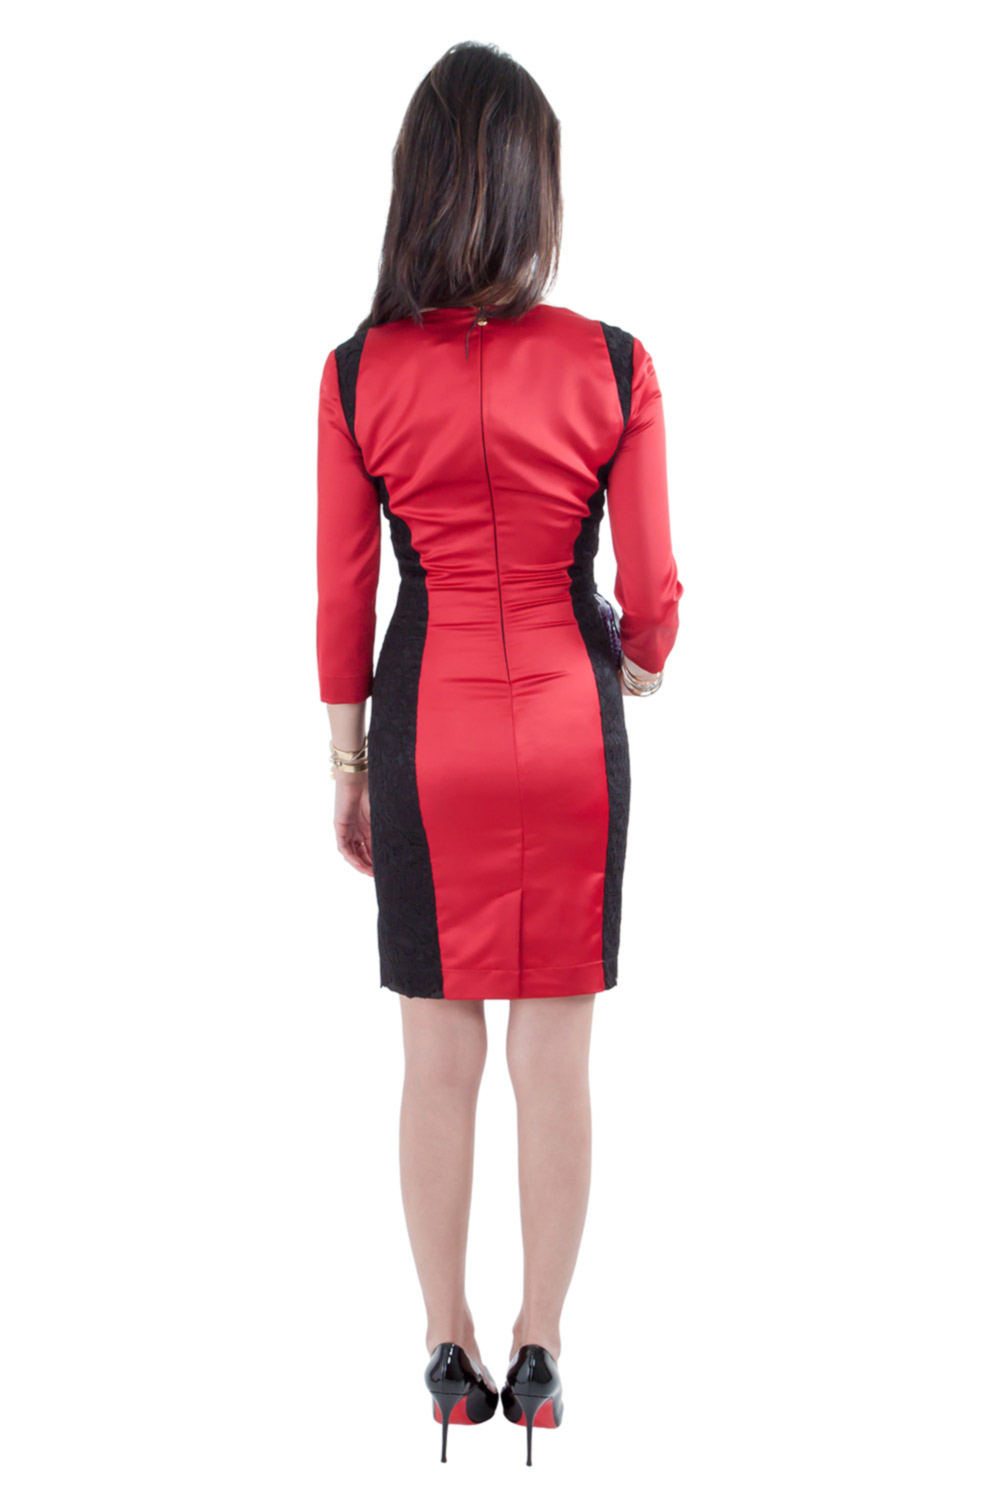 Pre-owned Just Cavalli Dark Red Stretch Satin Contrast Lace Paneled V Neck Sheath Dress S